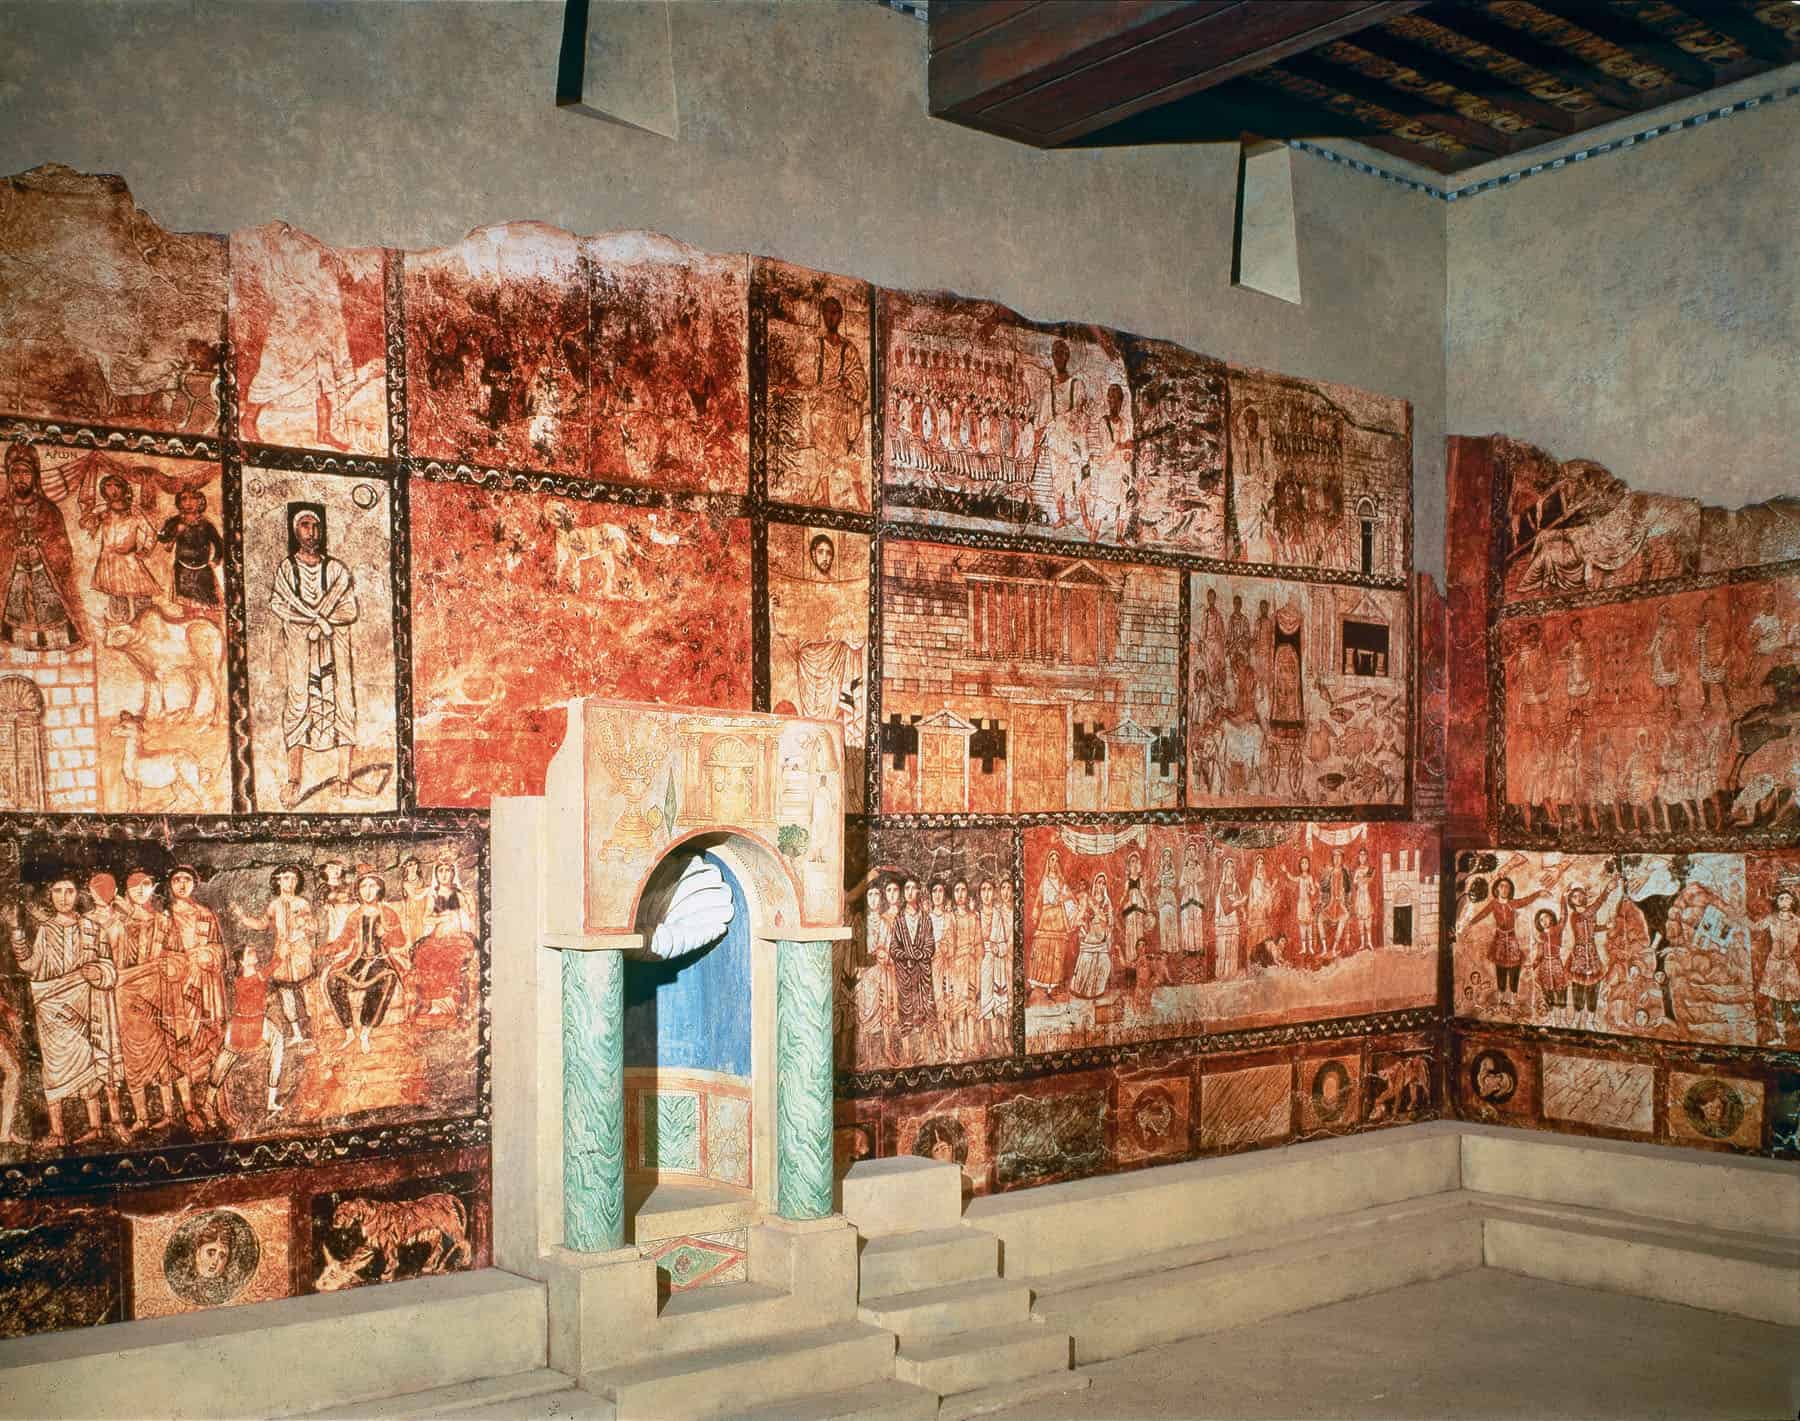 "Iconography" in Jewish Synagoge in Dura-Europos, dating back to the 2nd century AD.